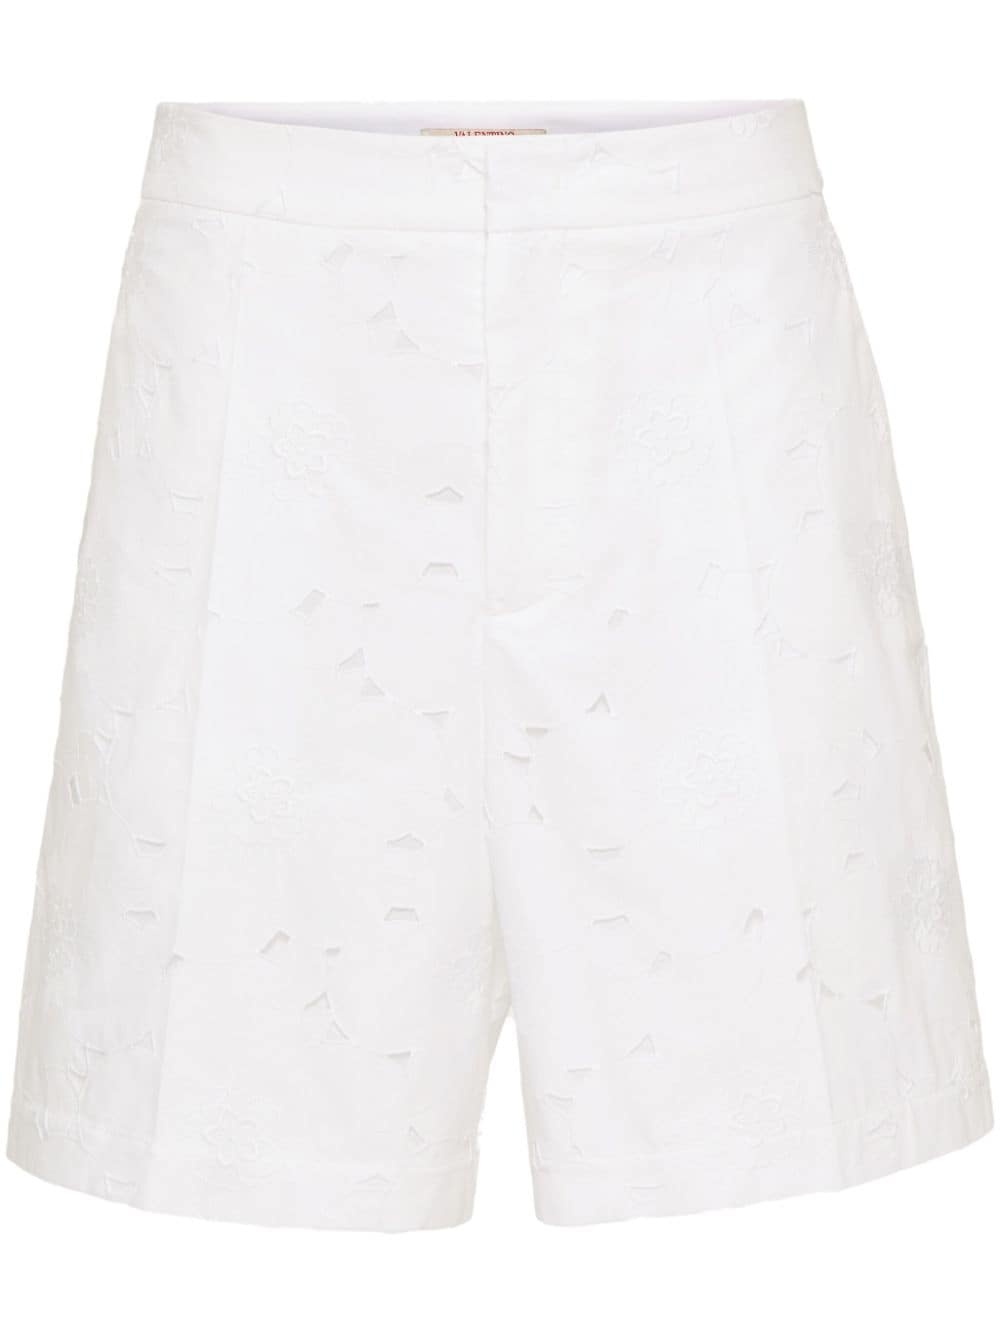 broderie-anglaise cotton bermuda shorts - 1